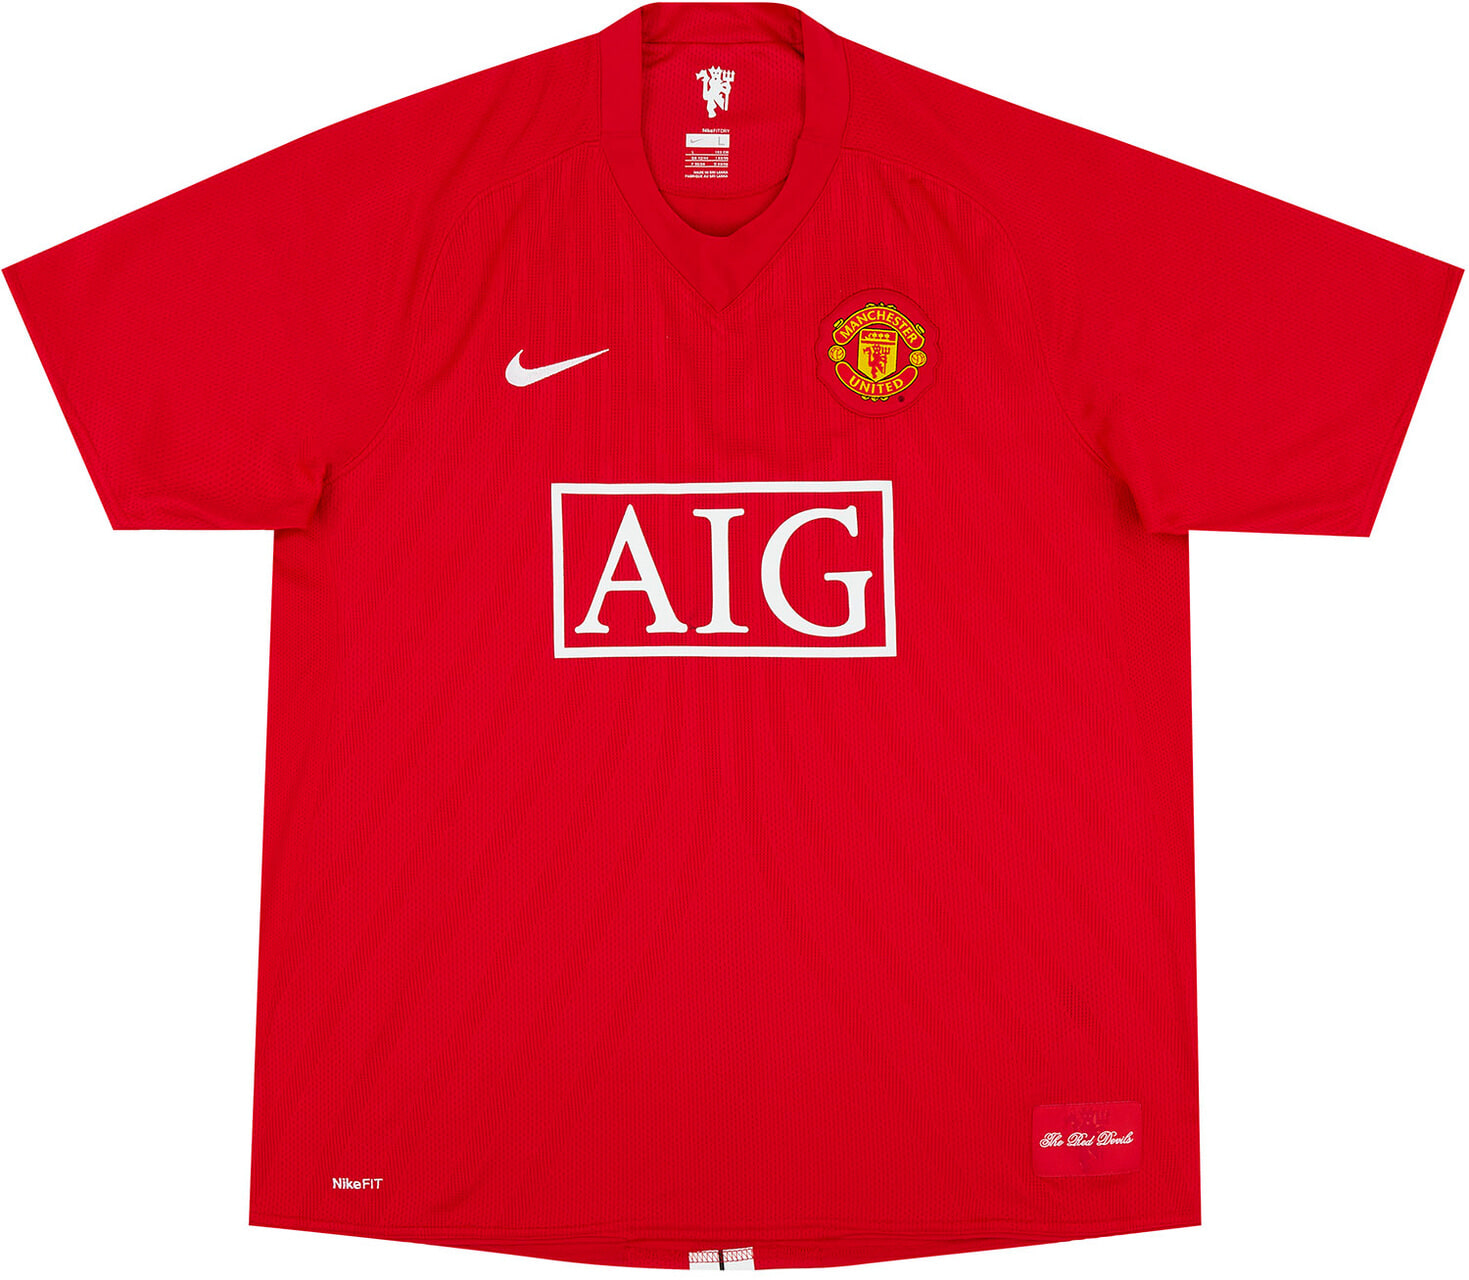 2007-09 Manchester United Home Shirt - 7/10 - ()